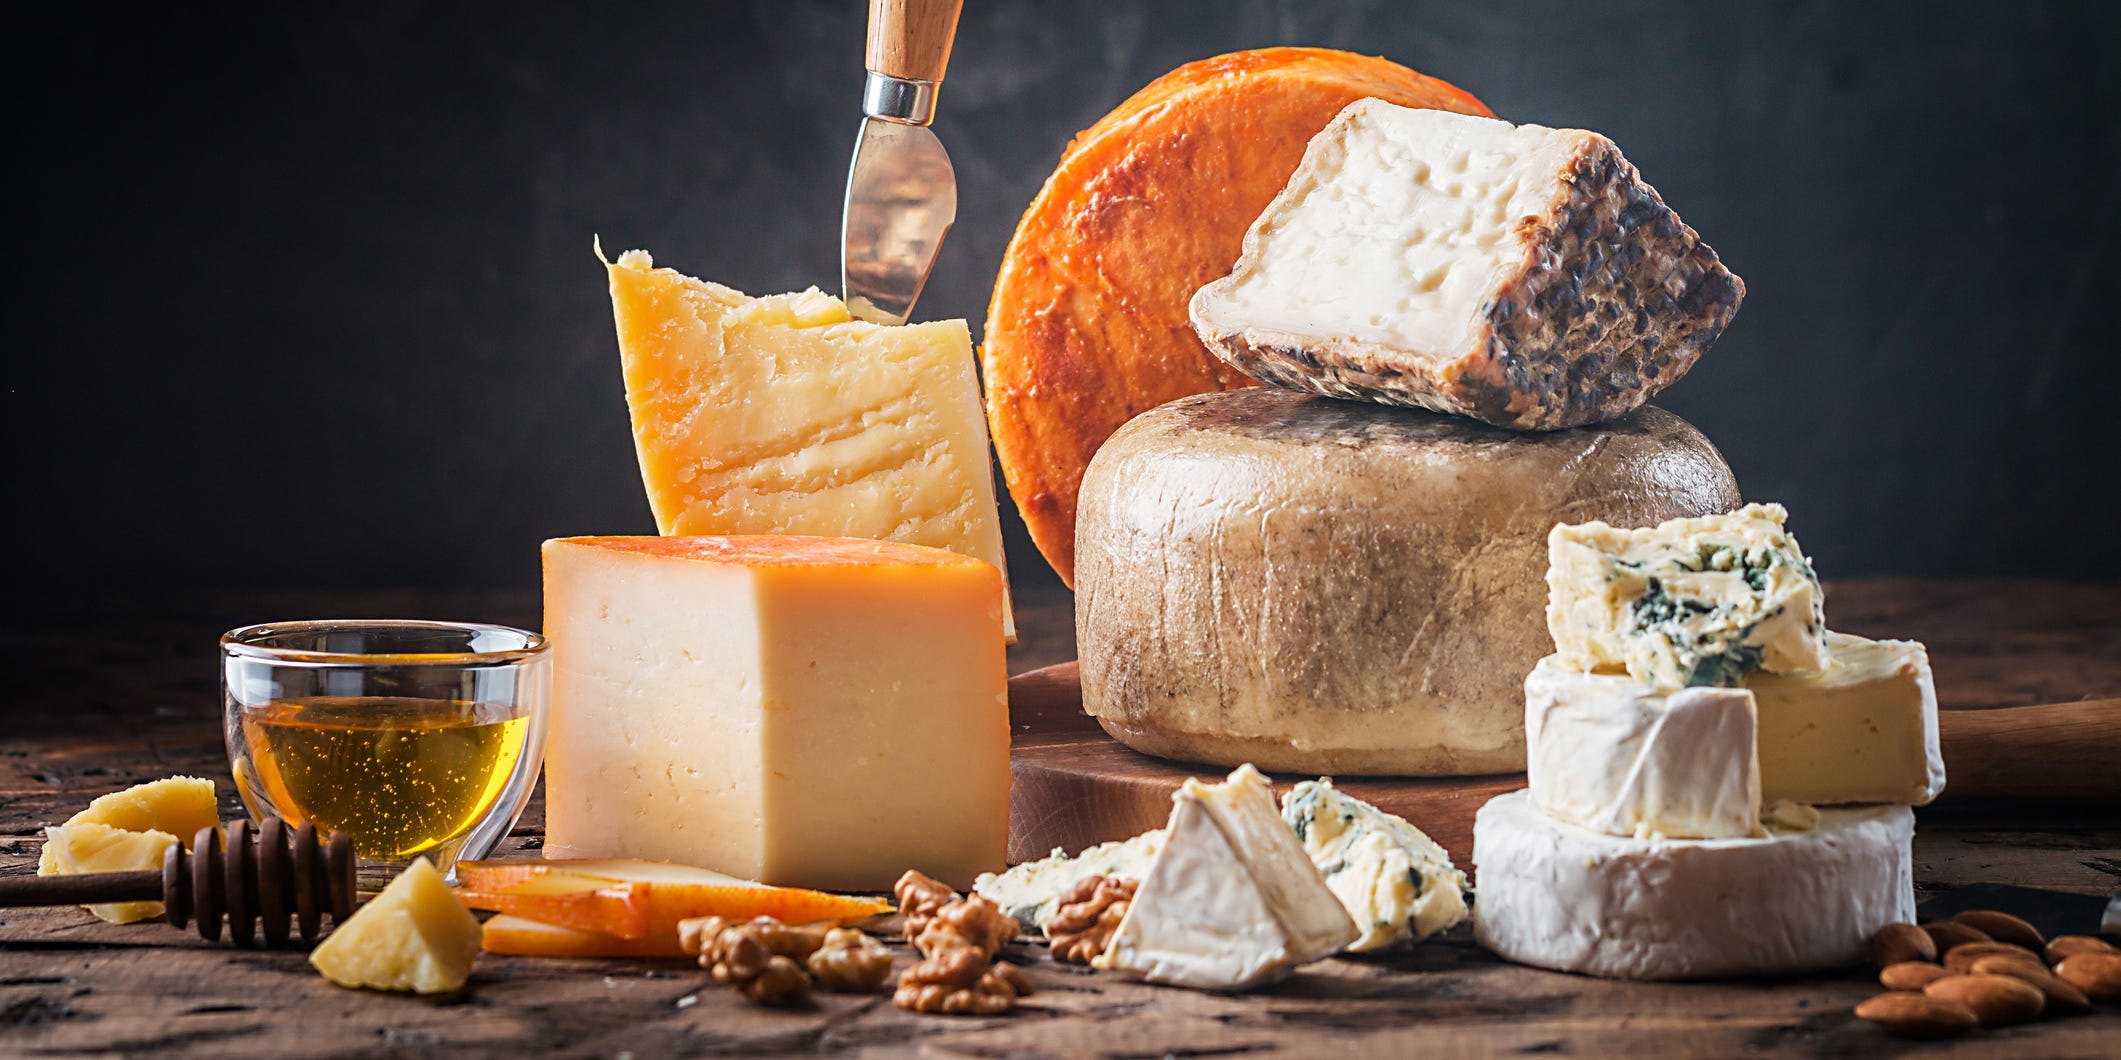 Many different types of cheeses